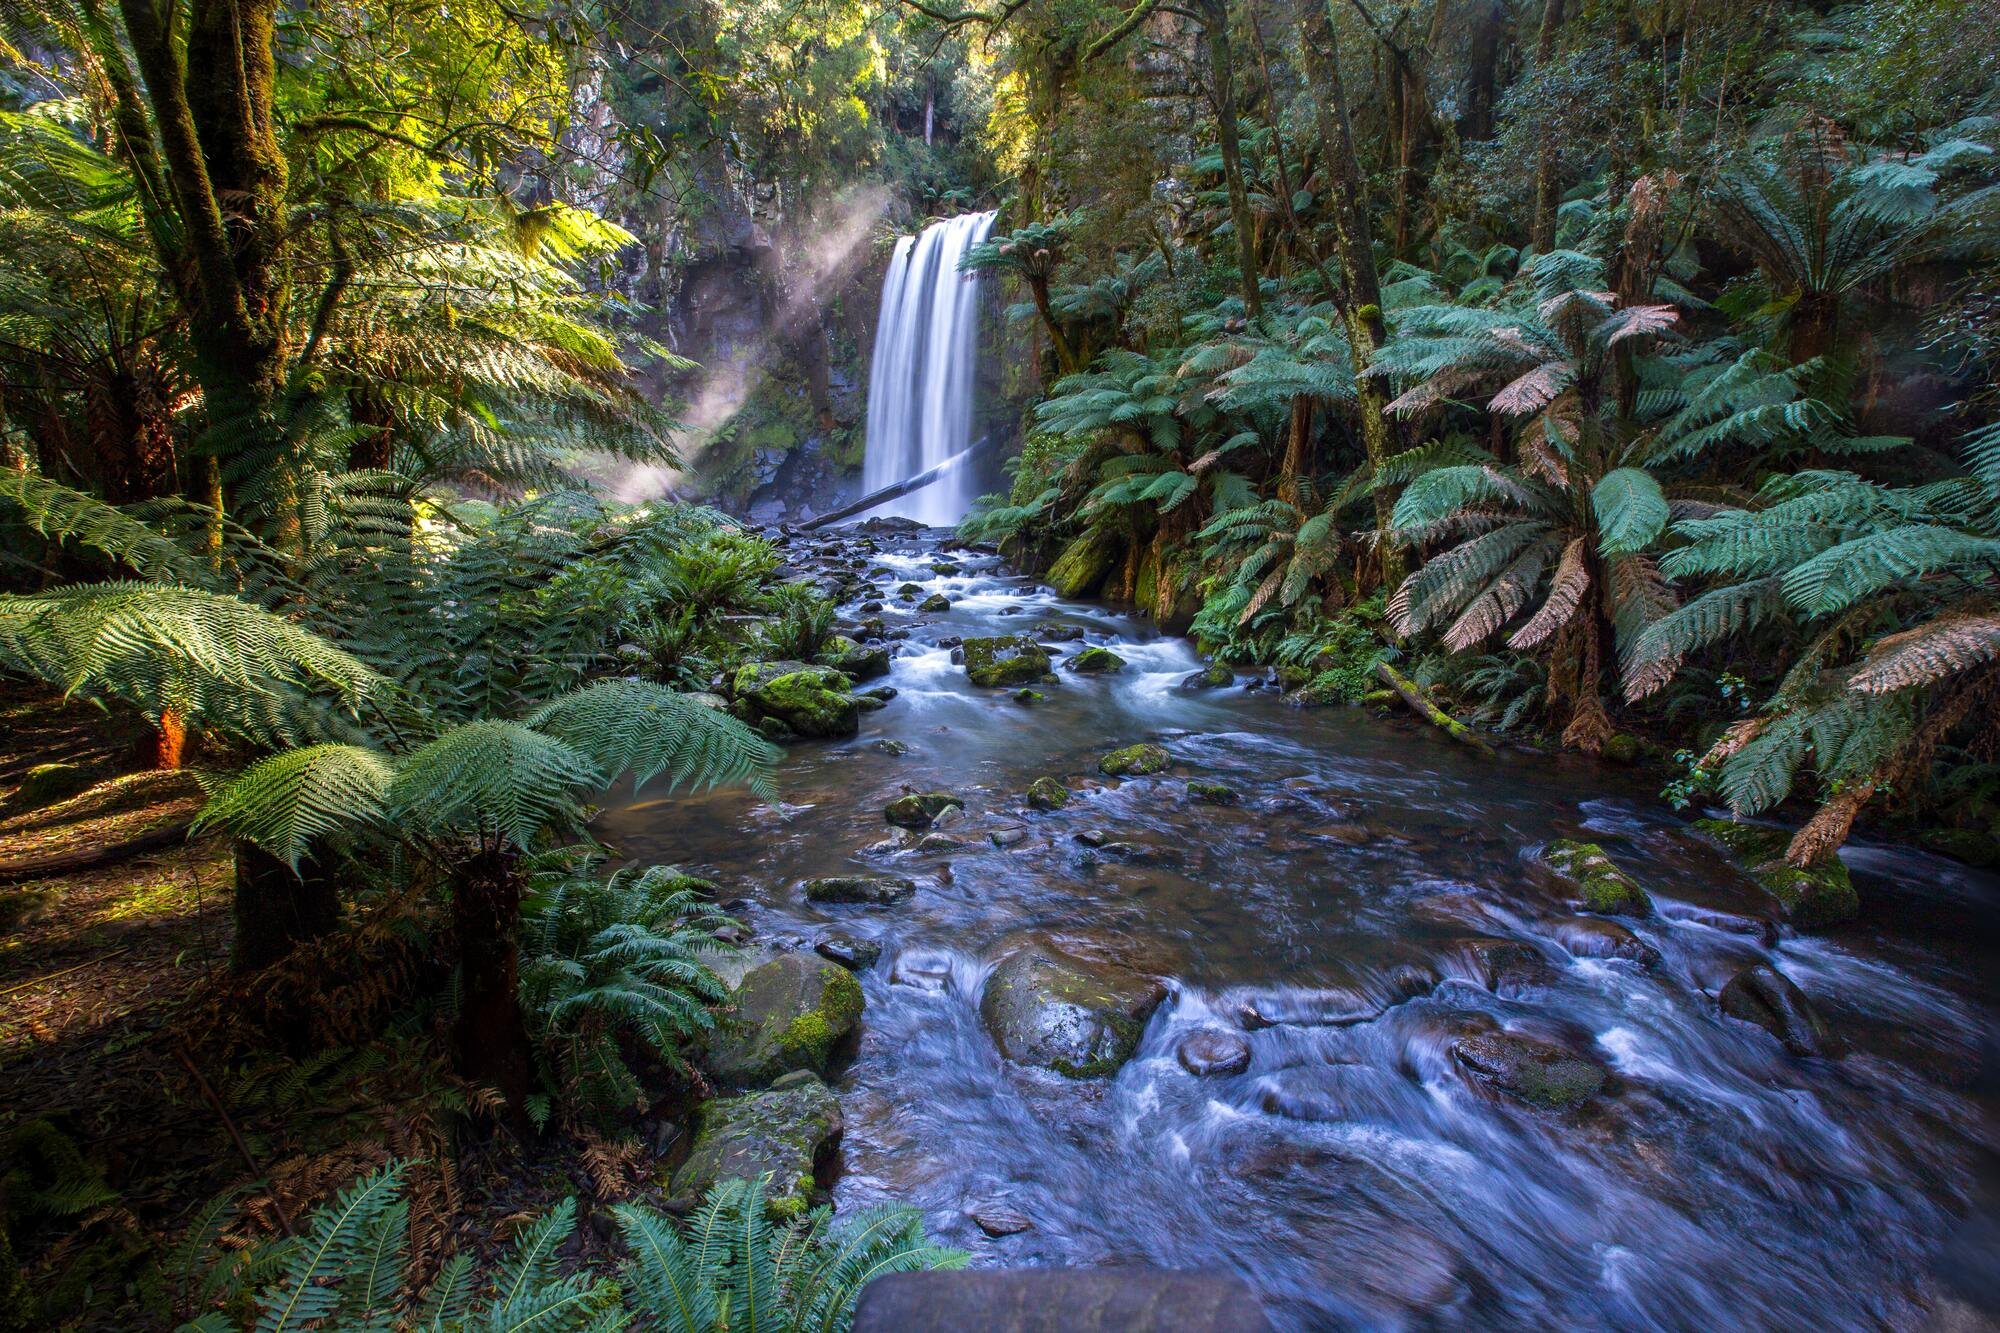 <p>Hopetoun Falls is located in the state of Victoria in Otway National Park. The waterfall drops from the top of the mountain into a small stream and runs through spectacular surroundings. It is another must-see and often-visited landmark in Australia.</p> <p>Photo: Steve Bittinger / Unsplash</p>